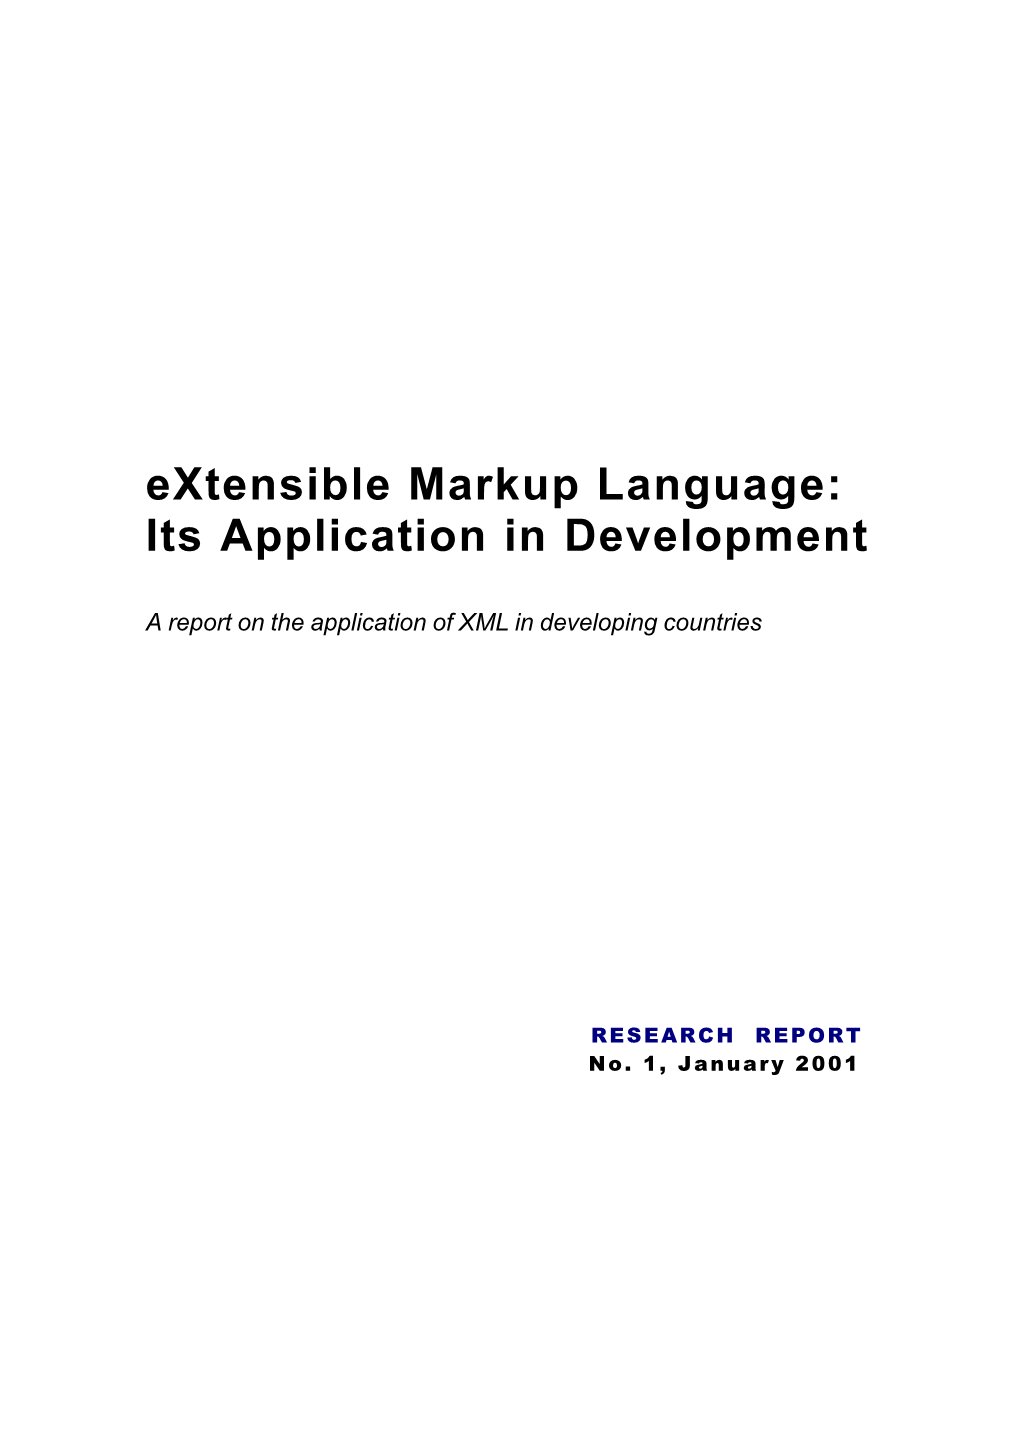 Extensible Markup Language: Its Application in Development